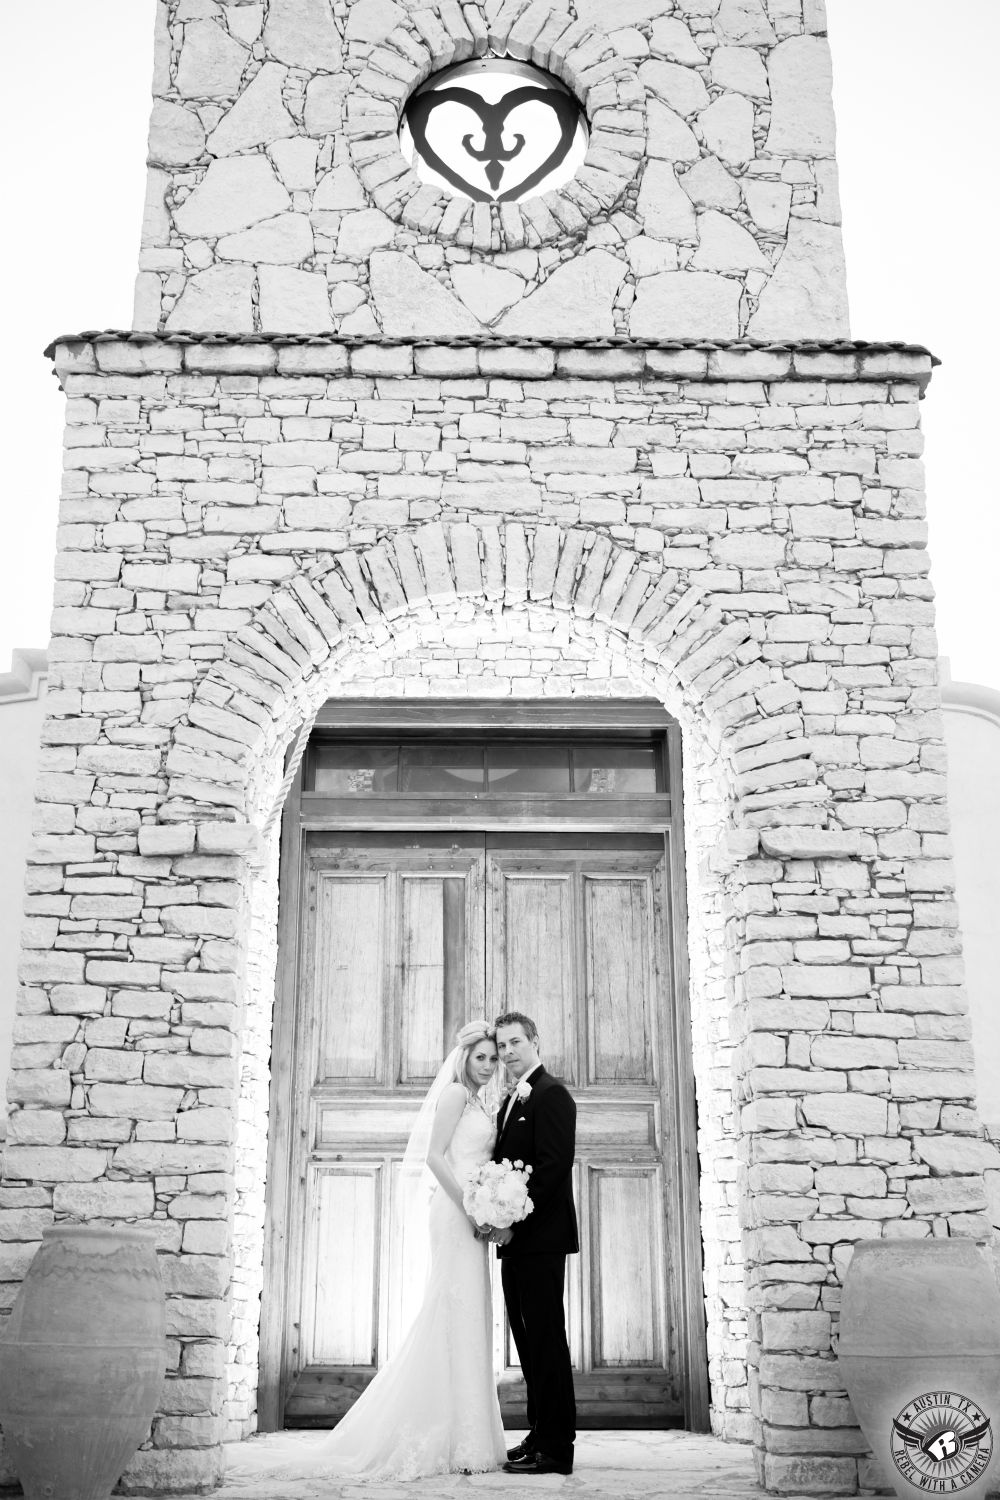 Dramatic black and white image of bride with delicate bouquet from Exquisite Petals Austin wedding florist and groom in black tuxedo stand in front of the wooden doors of Ian's Chapel at Camp Lucy the wedding venue in Dripping Springs, the wedding capital of Texas wedding coordinated by Your Wedding, Your Way, Austin wedding Planner.